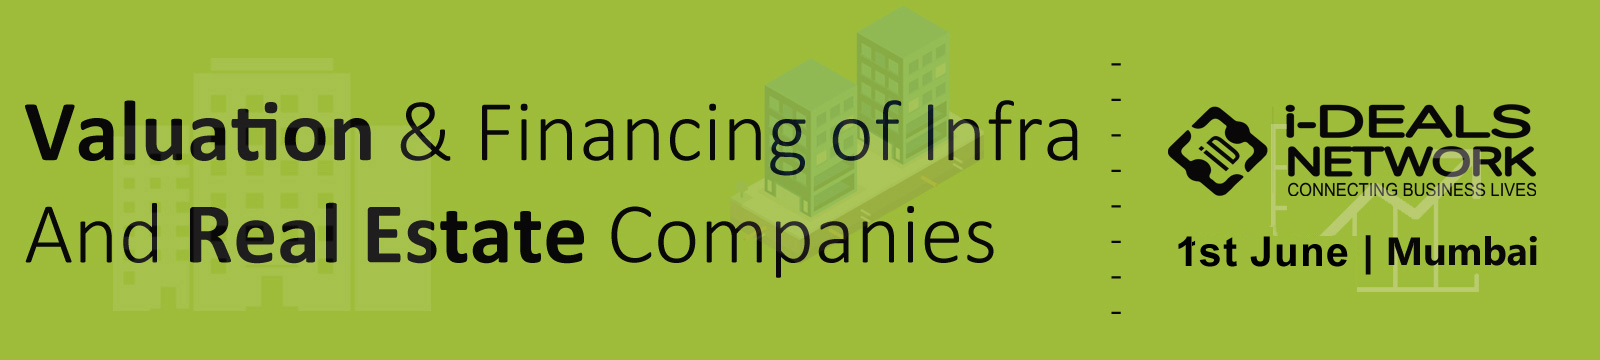 Valuation and Funding of Infra and Real Estate Companies